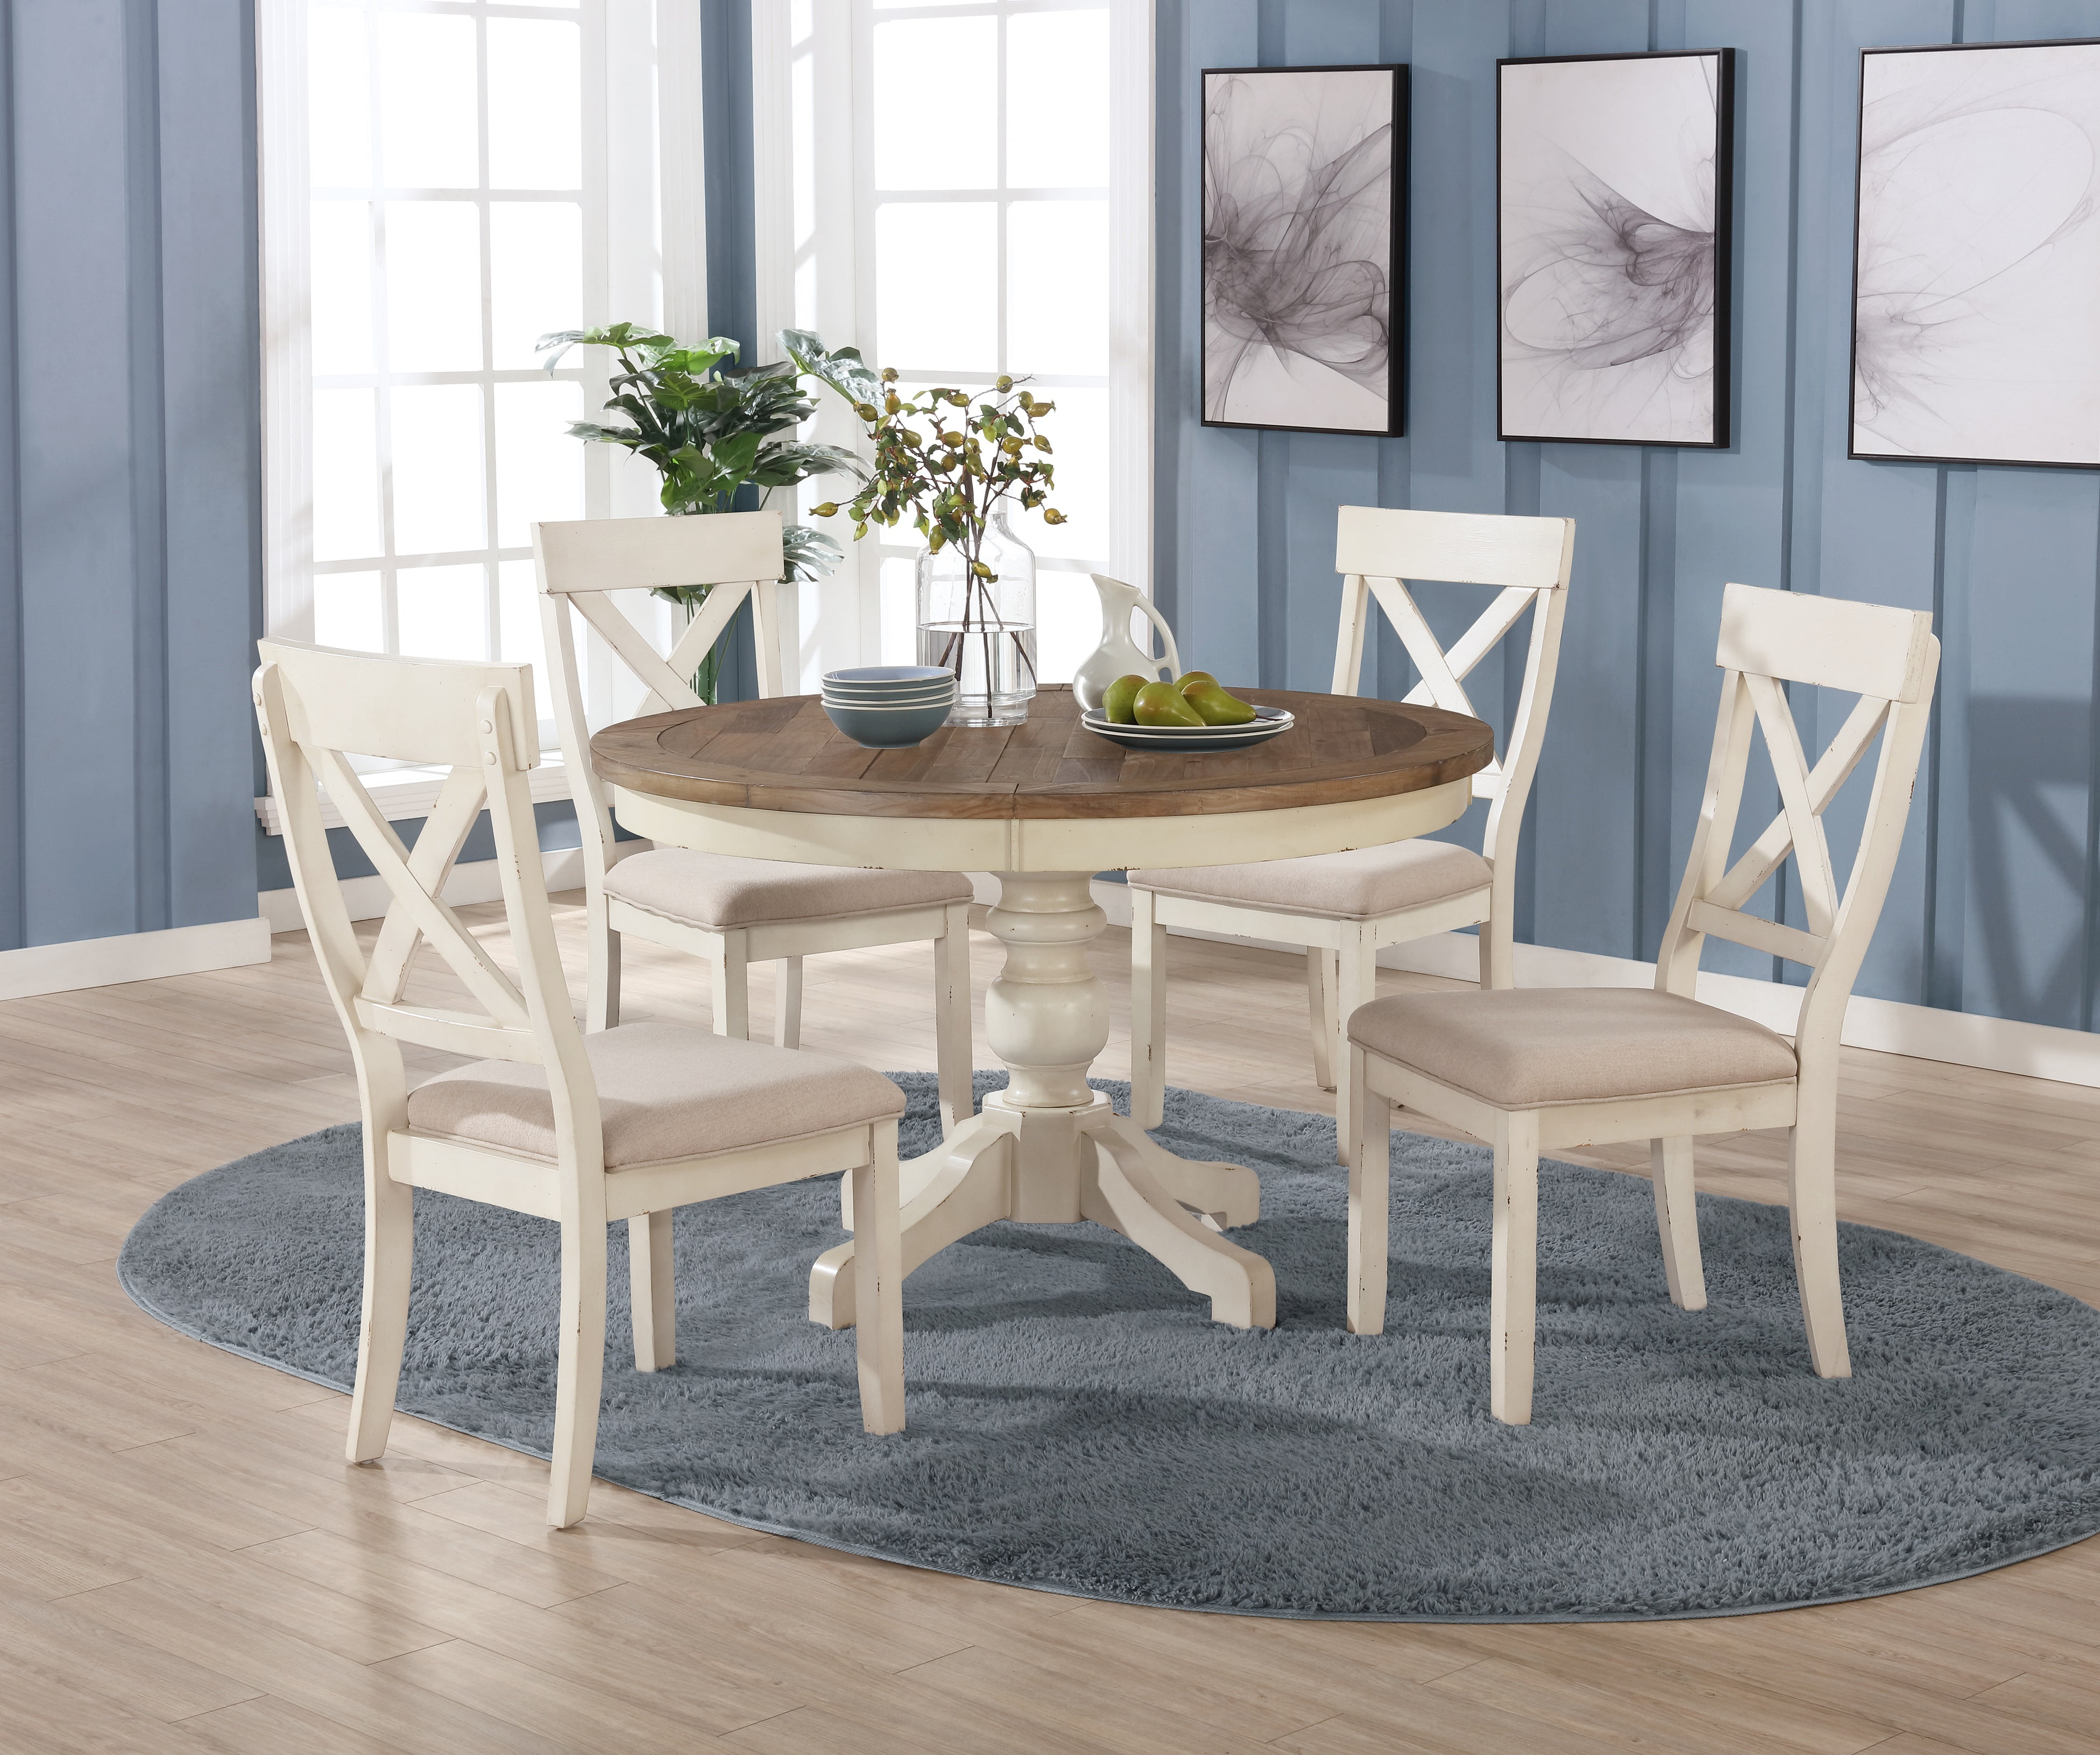 Roundhill Furniture Prato 5 Piece Round, Round Antique Table And Chairs